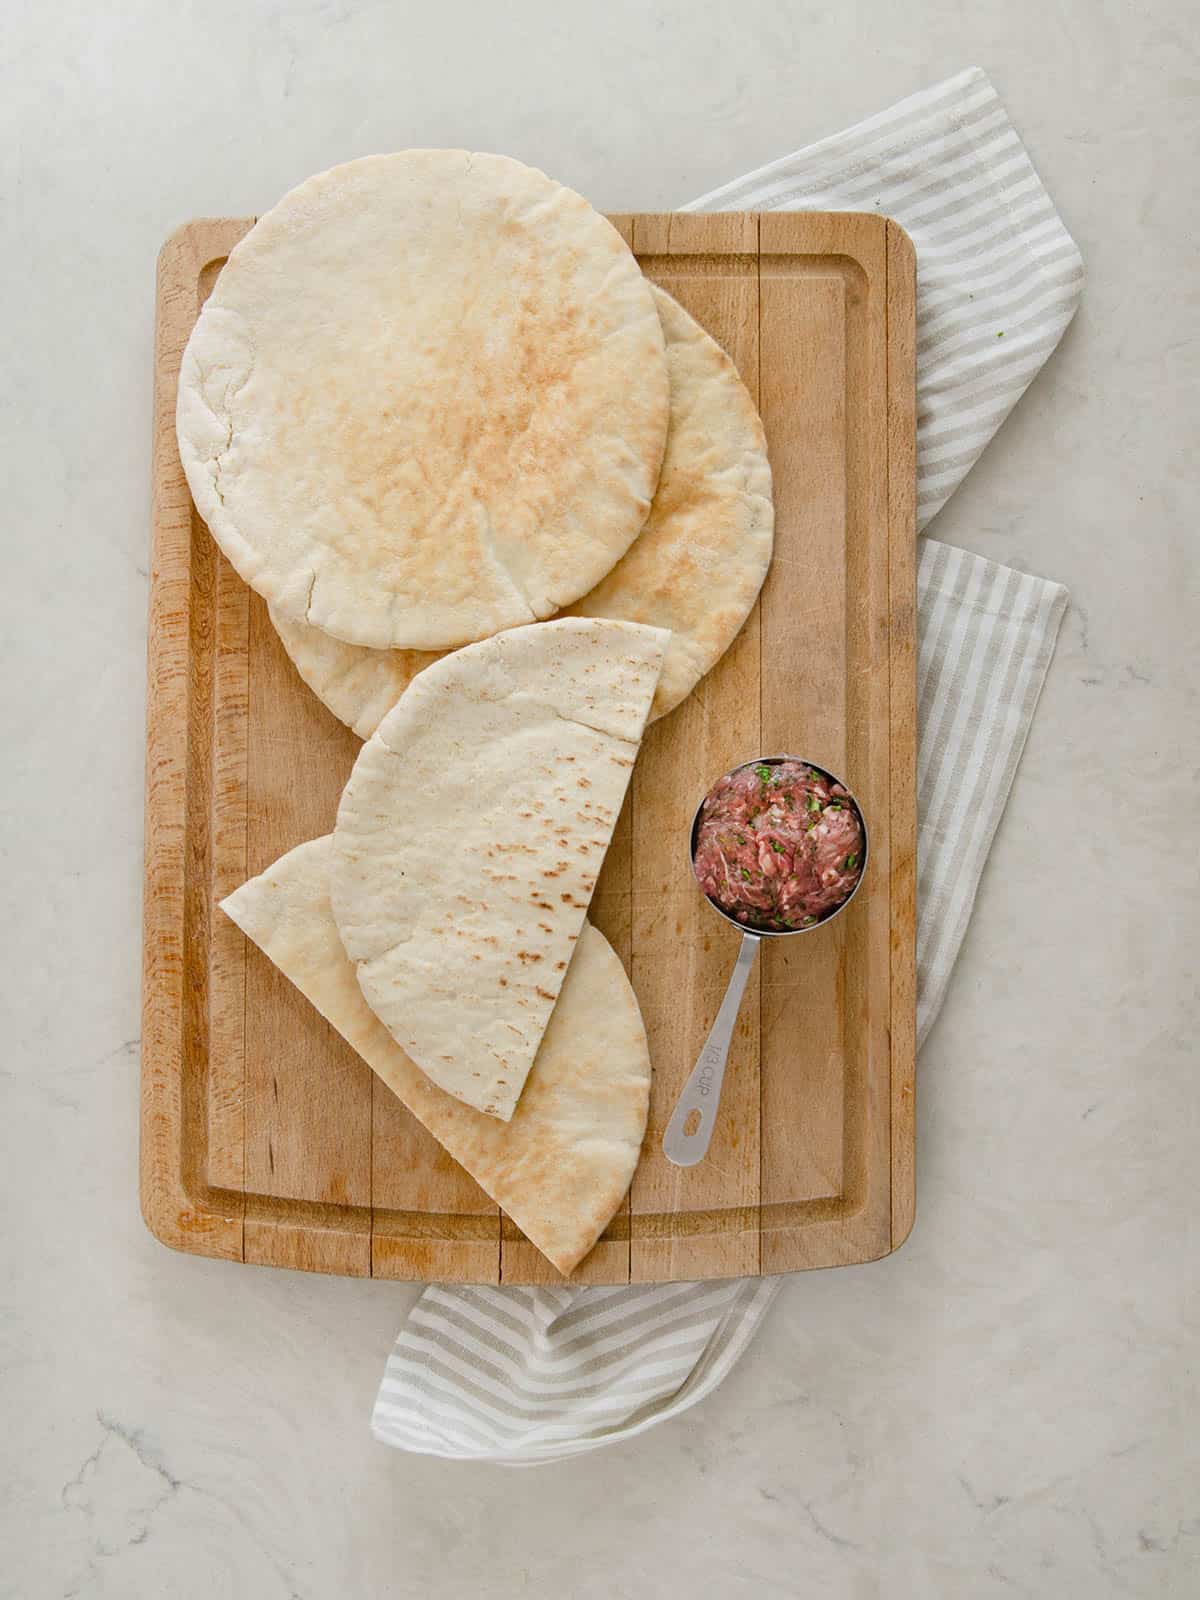 Pita bread on a cutting board with a scoop of ground meat mixture.